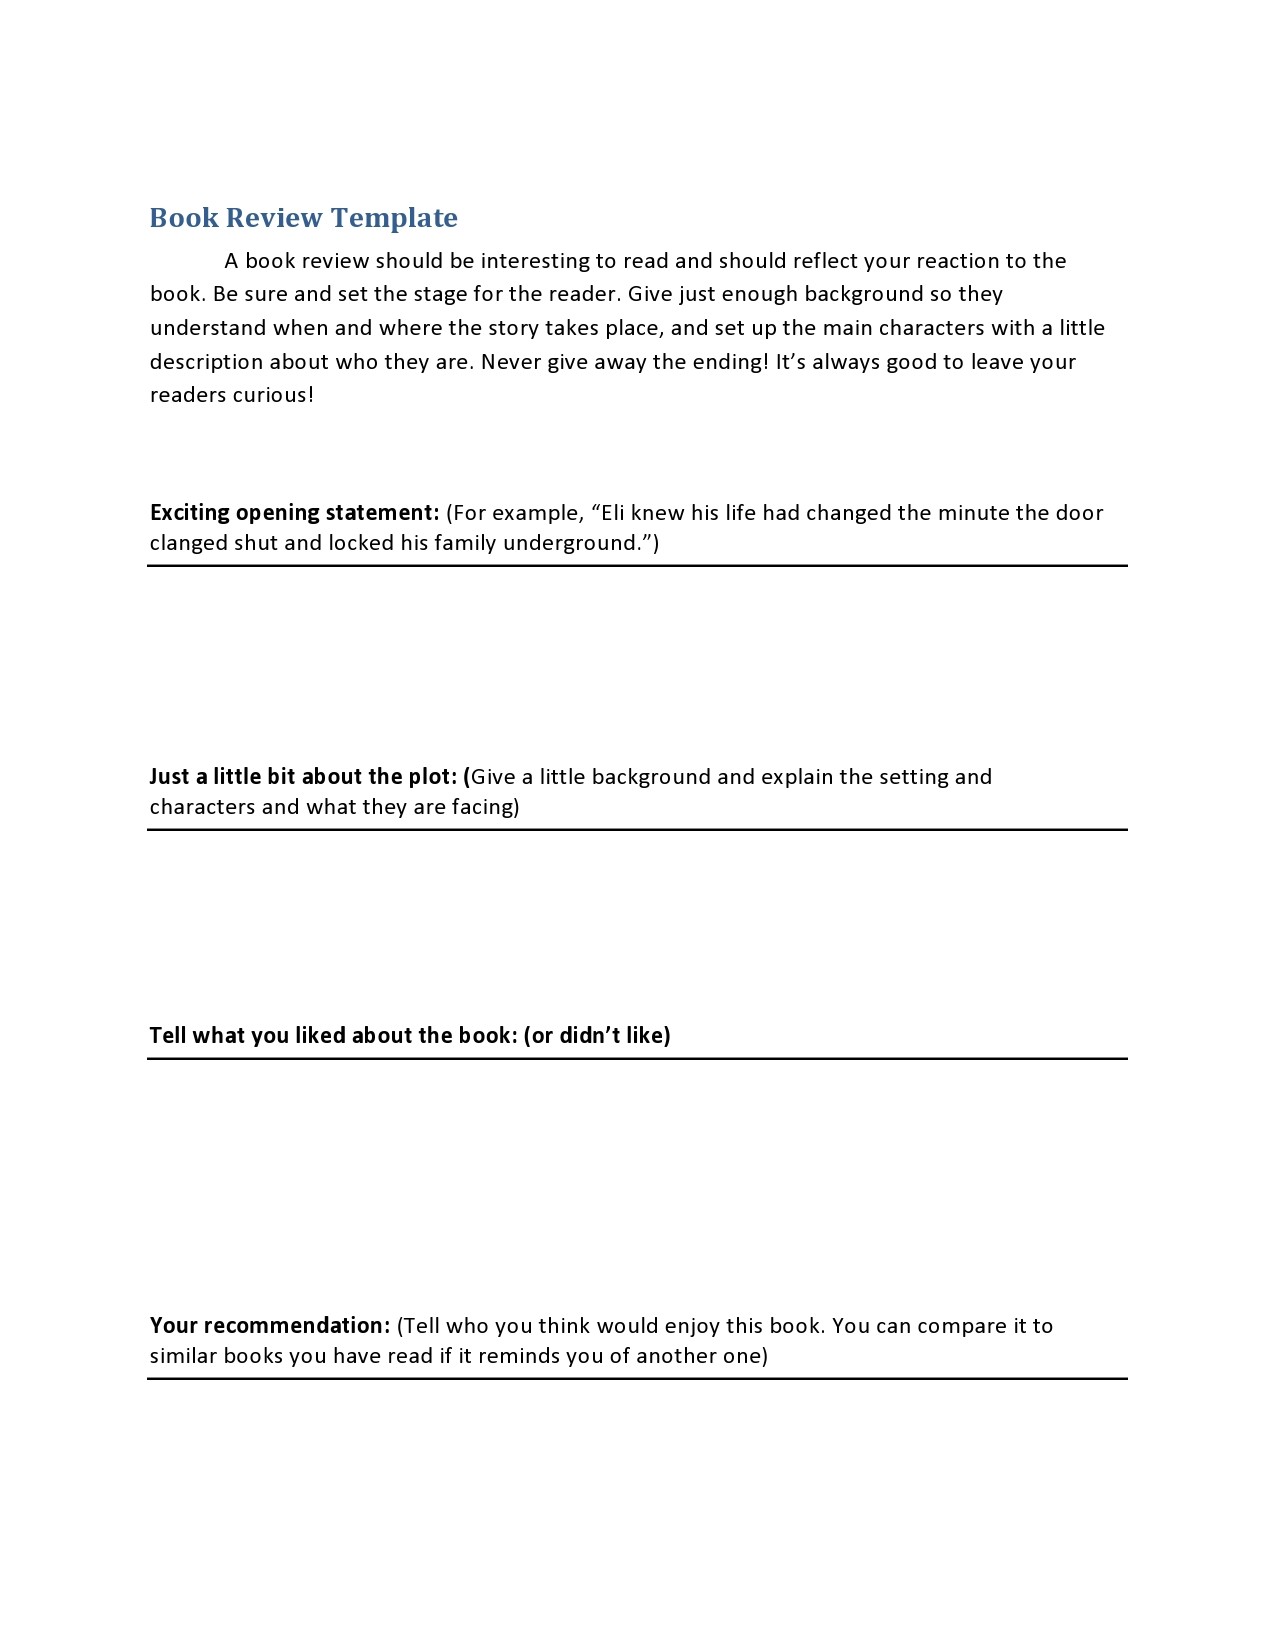 Free book review template 23